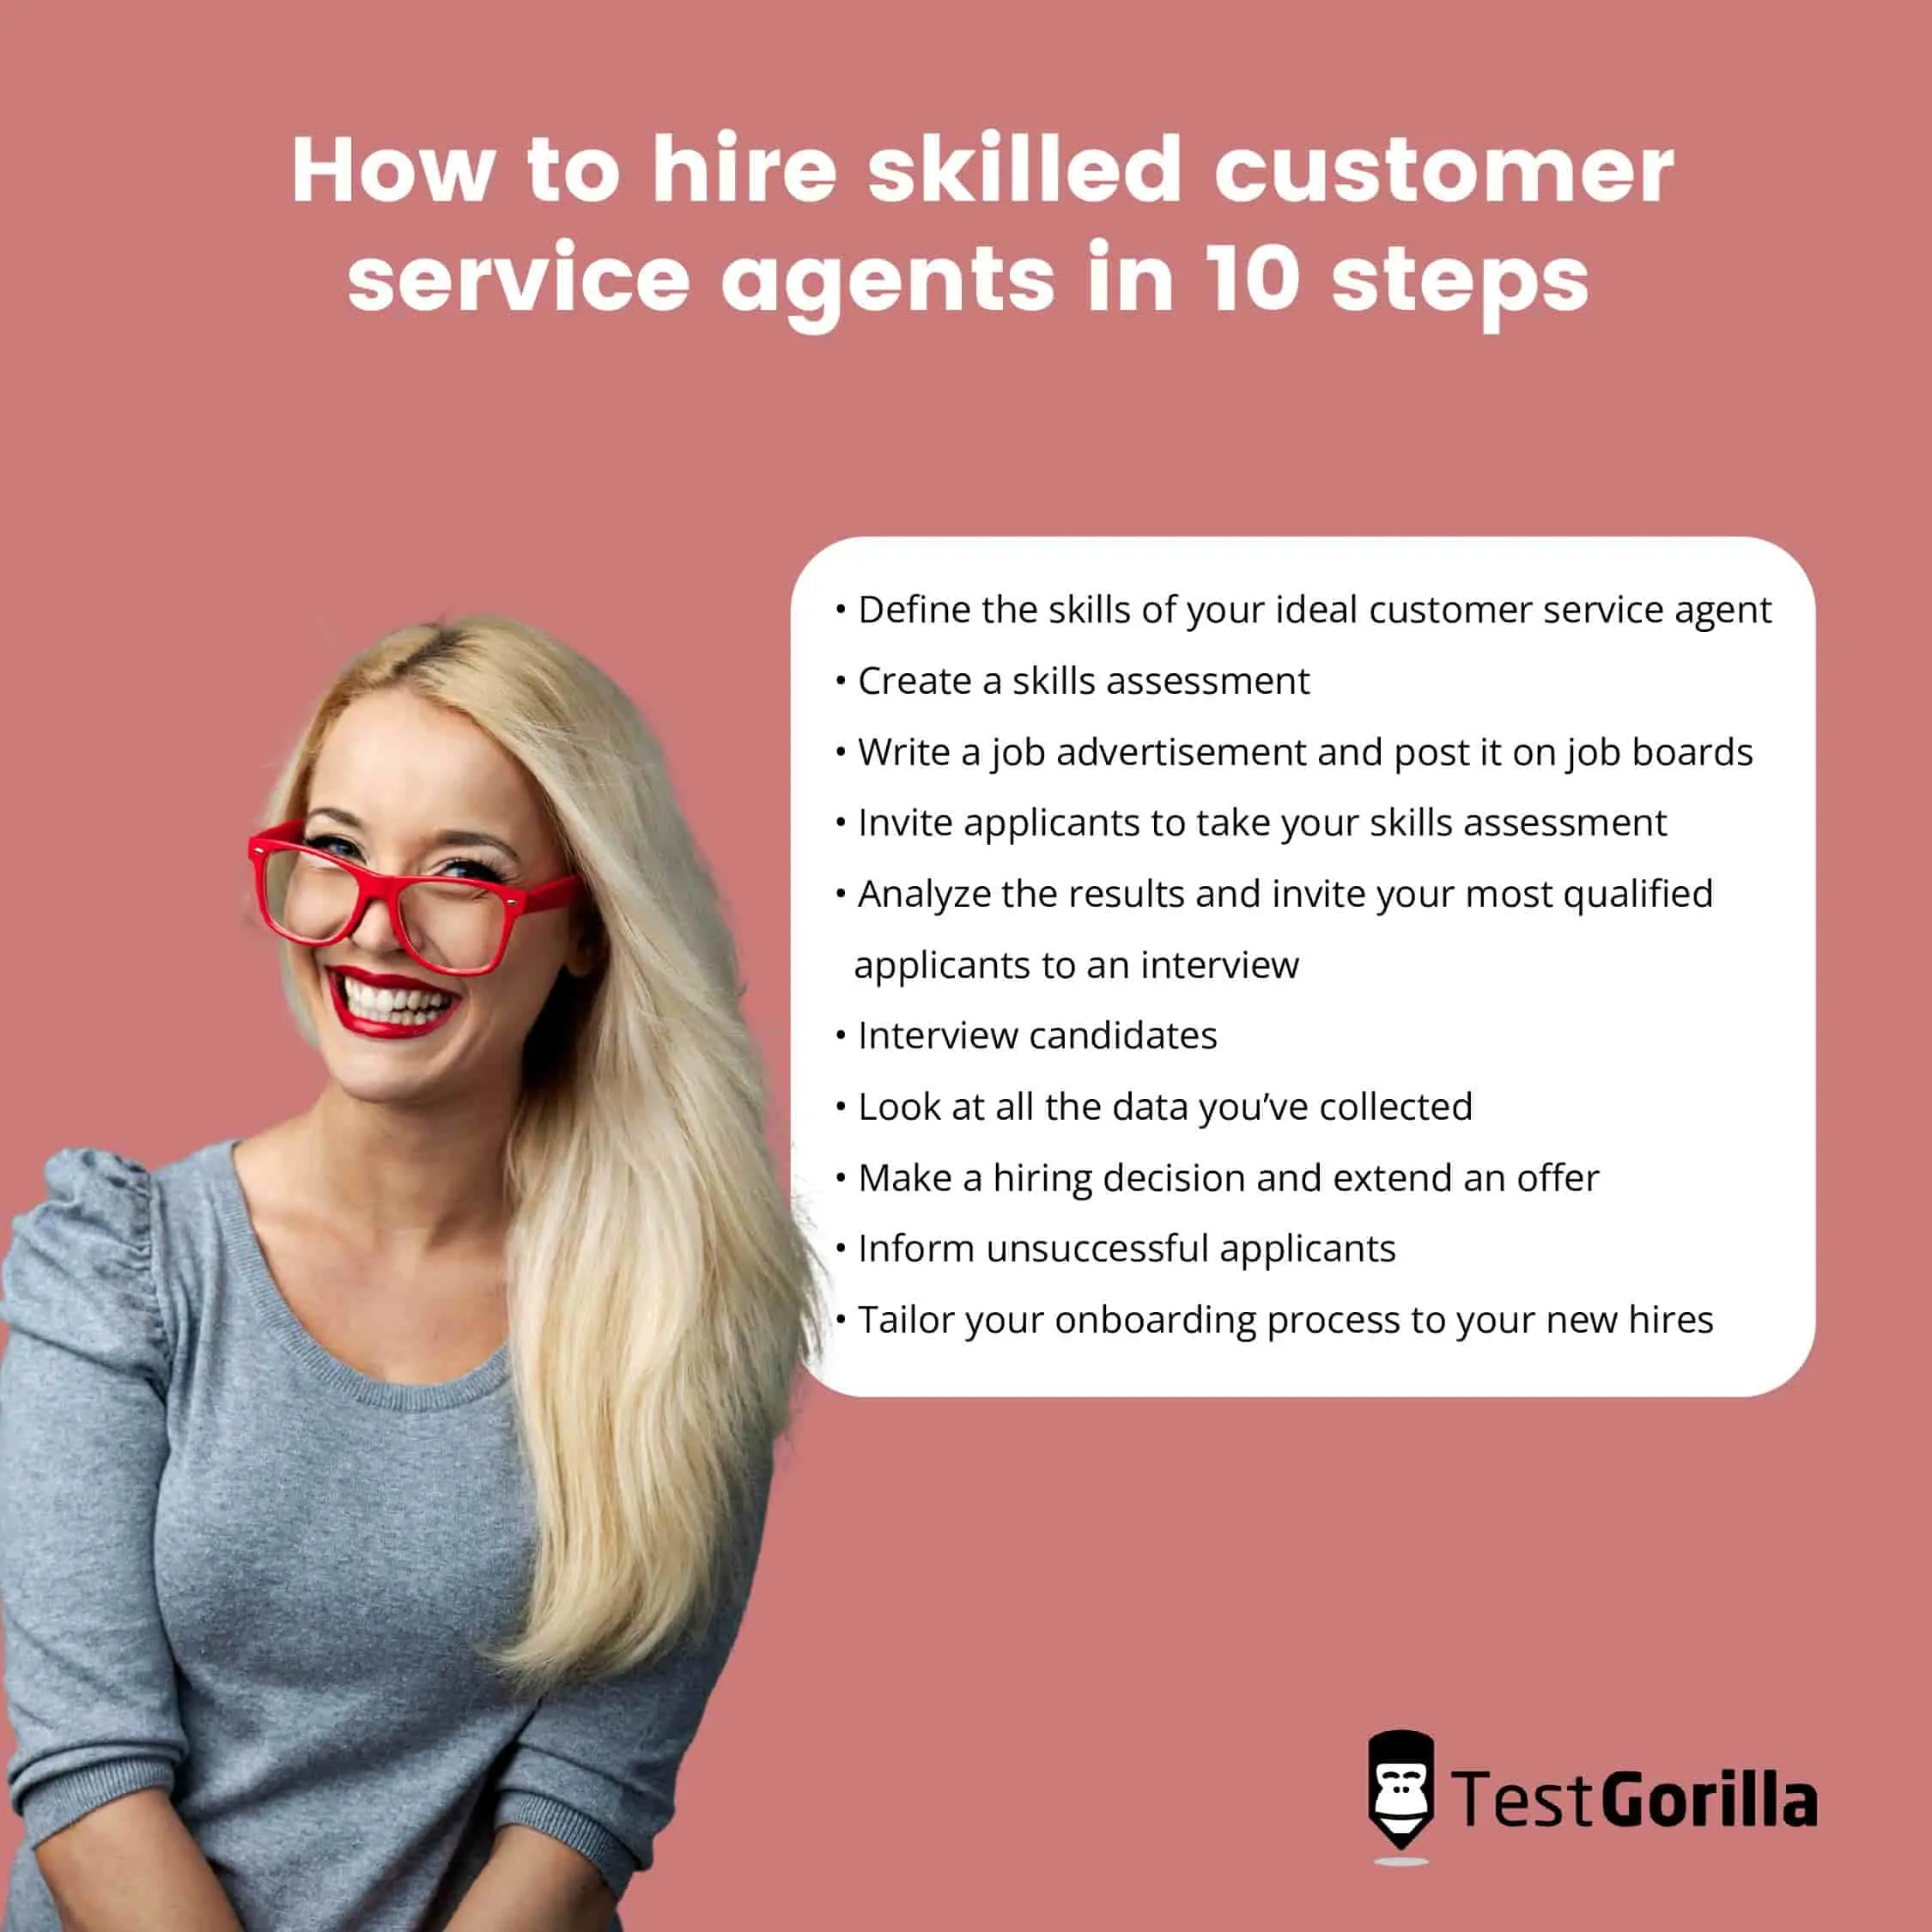 How to hire skilled customer service agents for your business in 10 steps